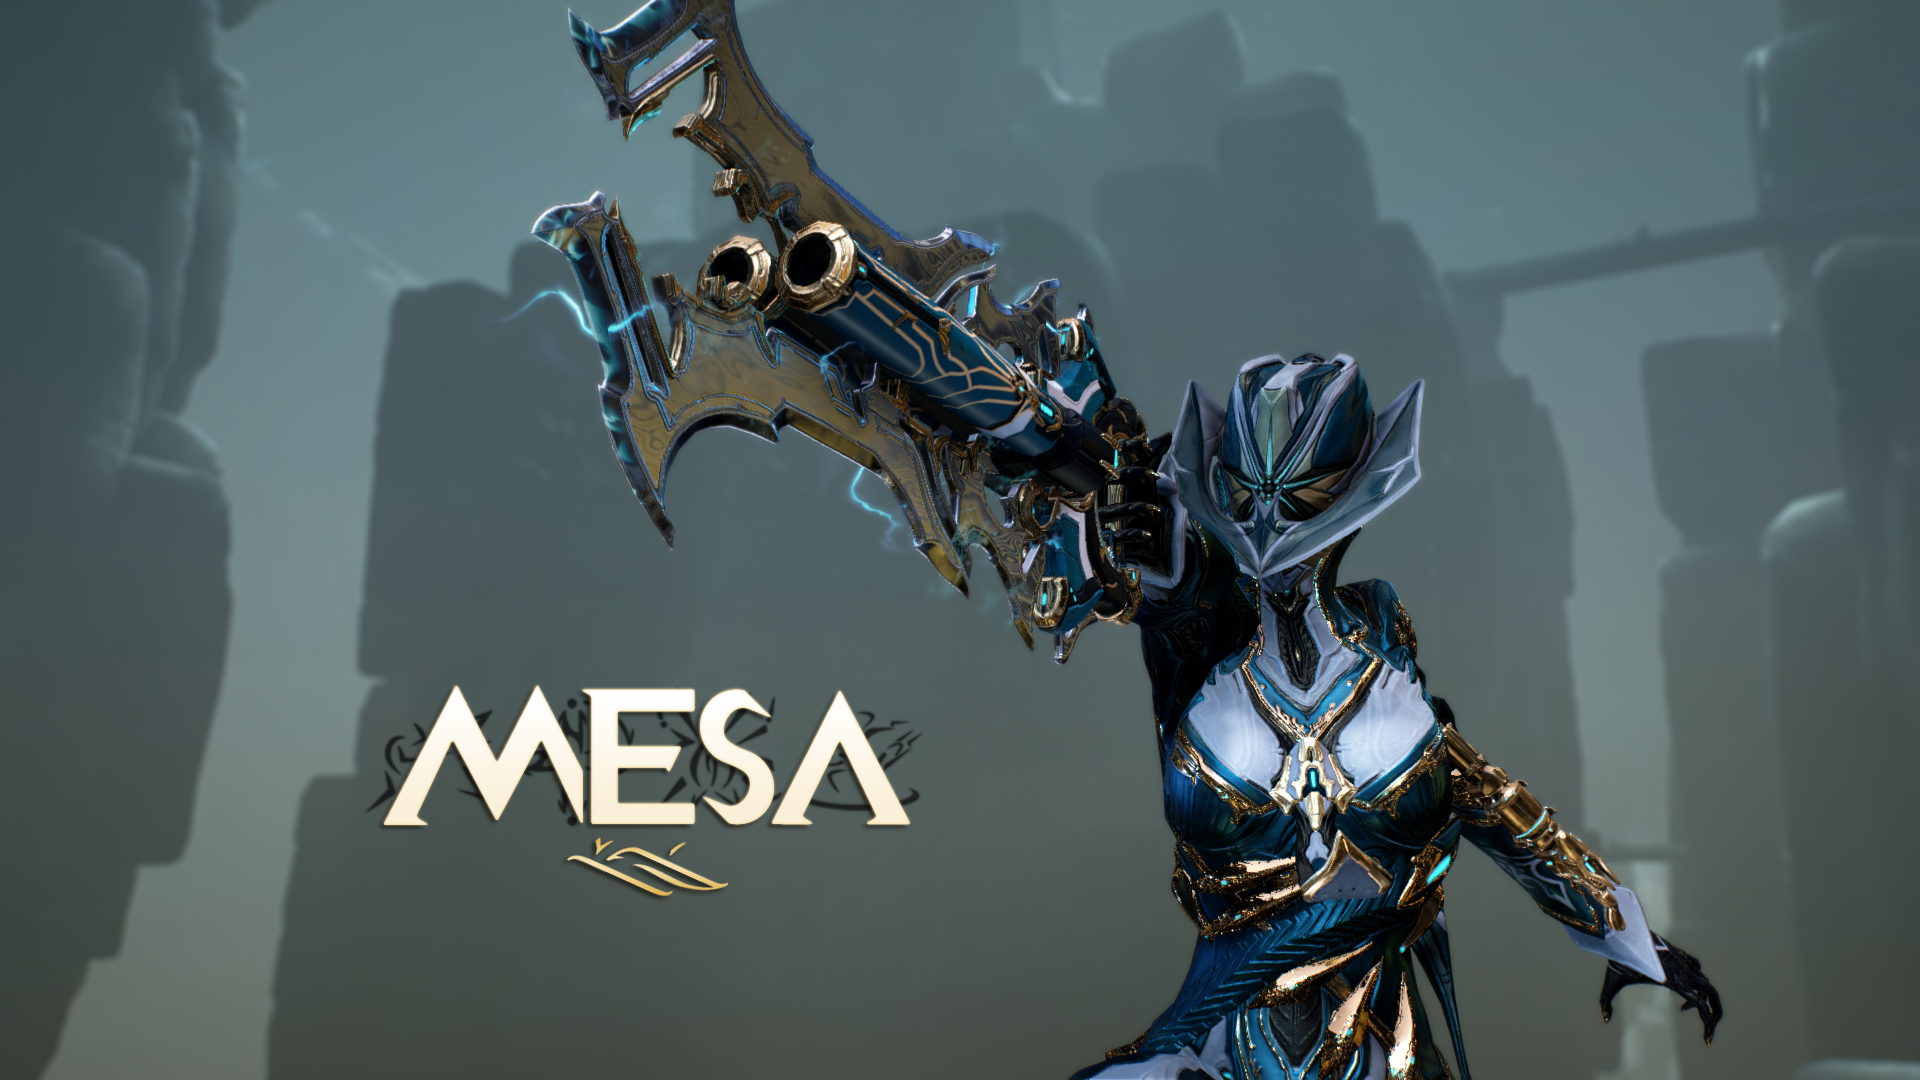 My first captura and editing for wallpaper with my first prime